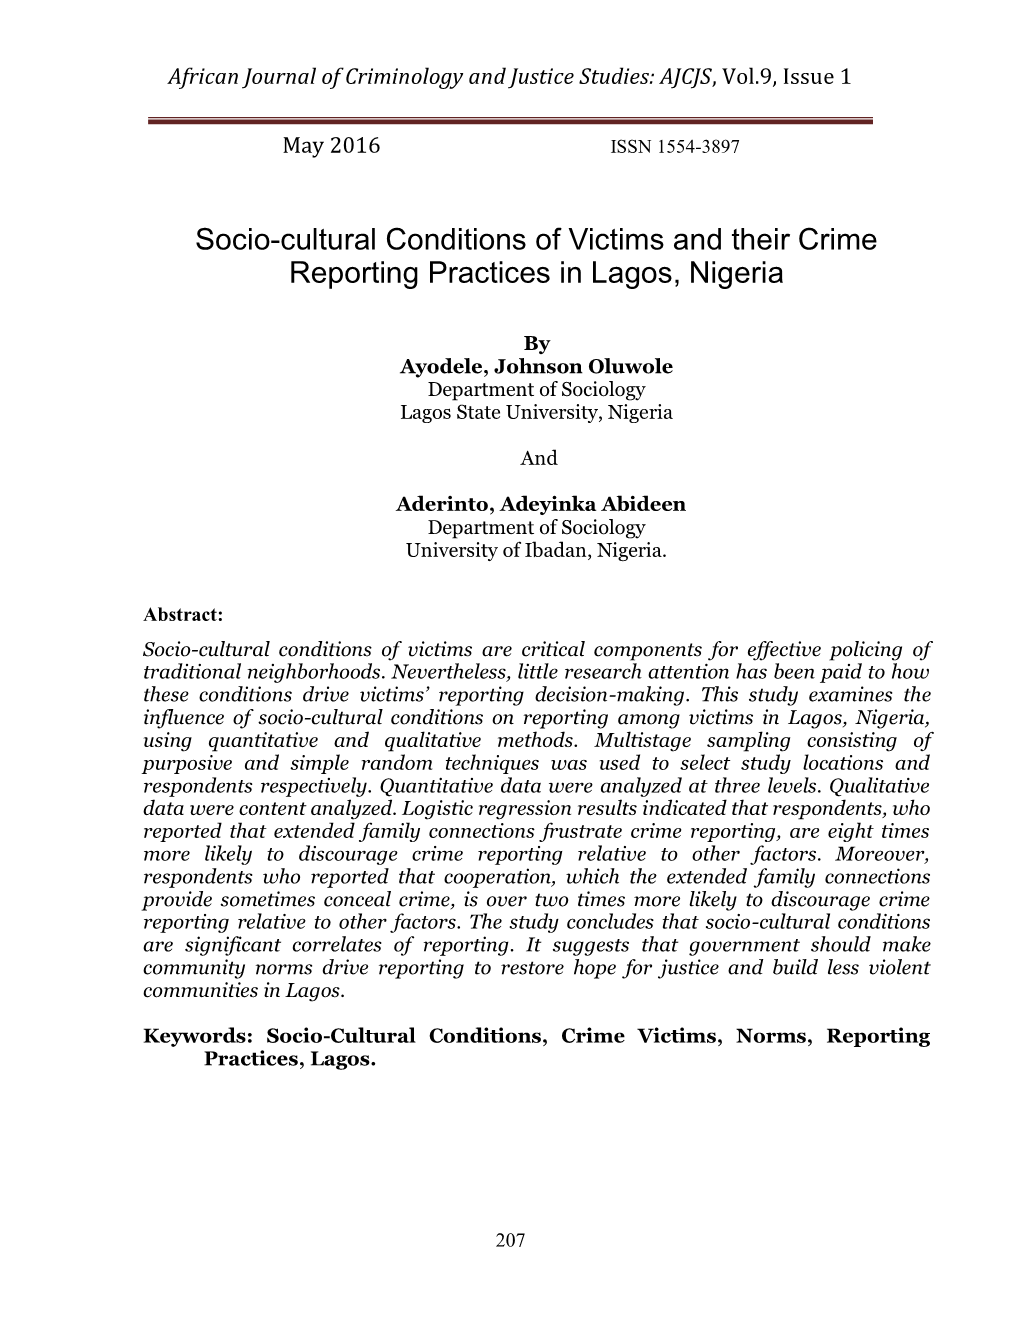 Socio-Cultural Conditions of Victims and Their Crime Reporting Practices in Lagos, Nigeria